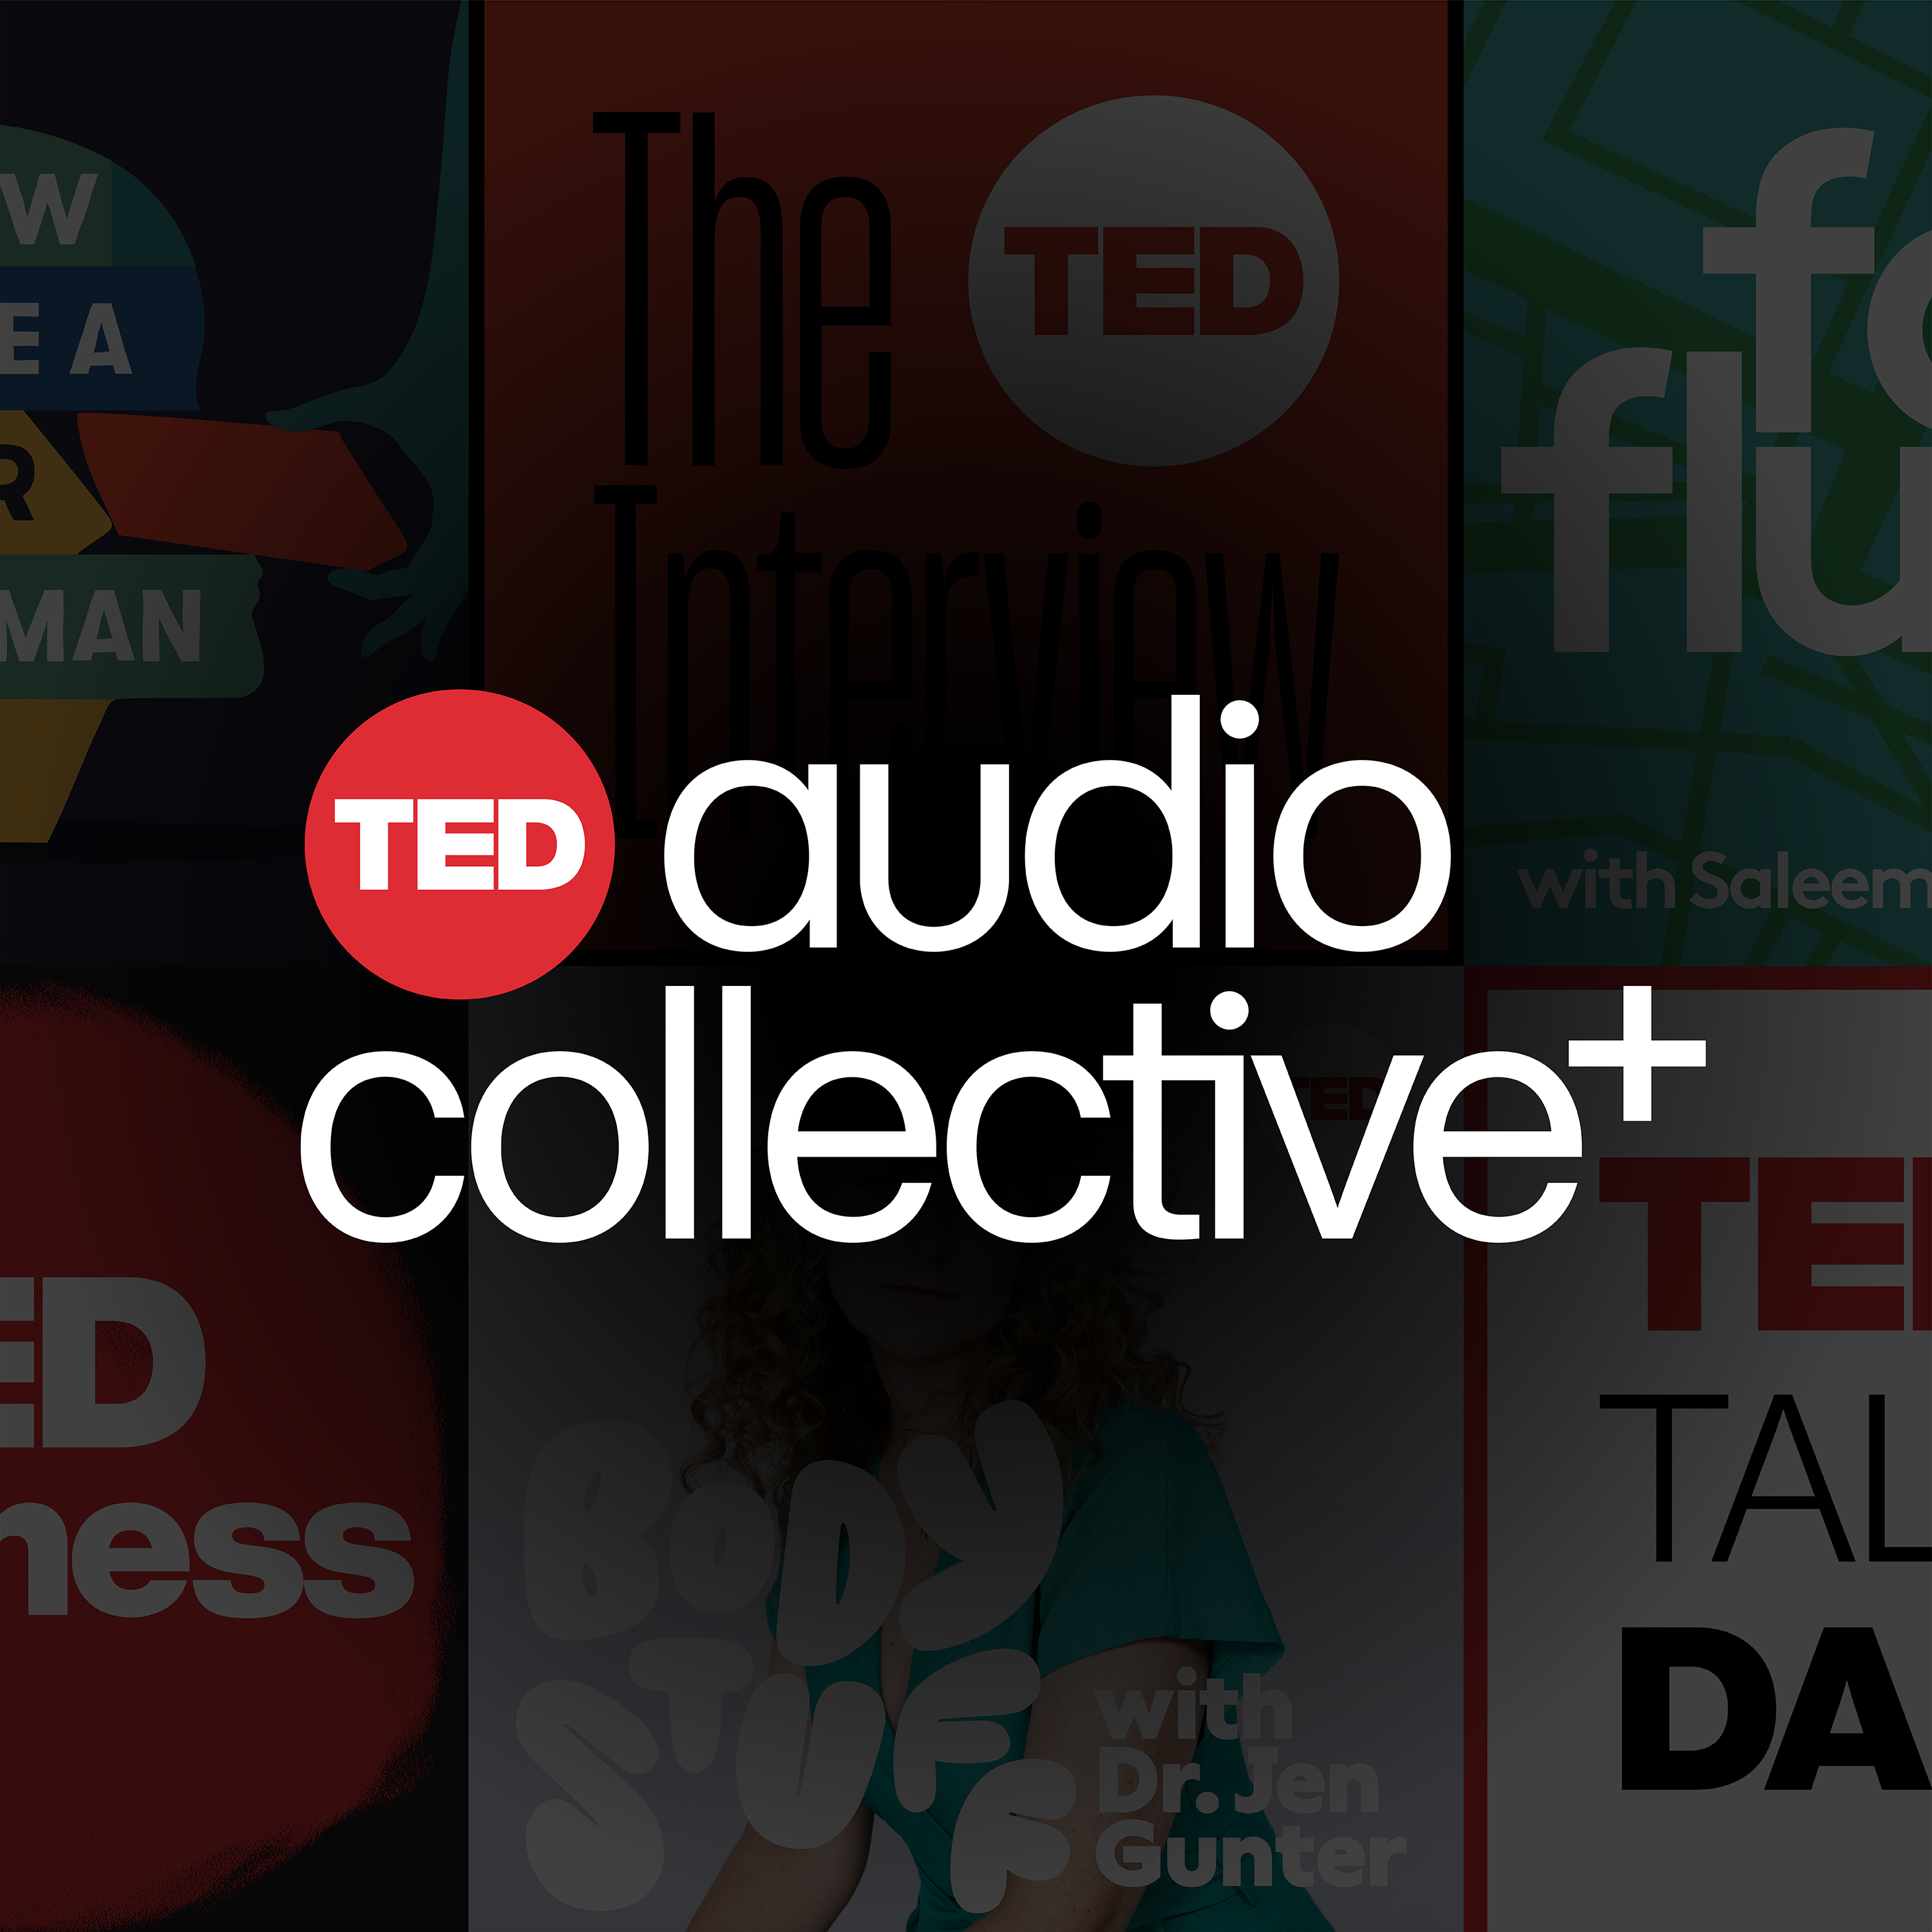 TED Launches TED Audio Collective+, a new subscription on Apple
Podcasts